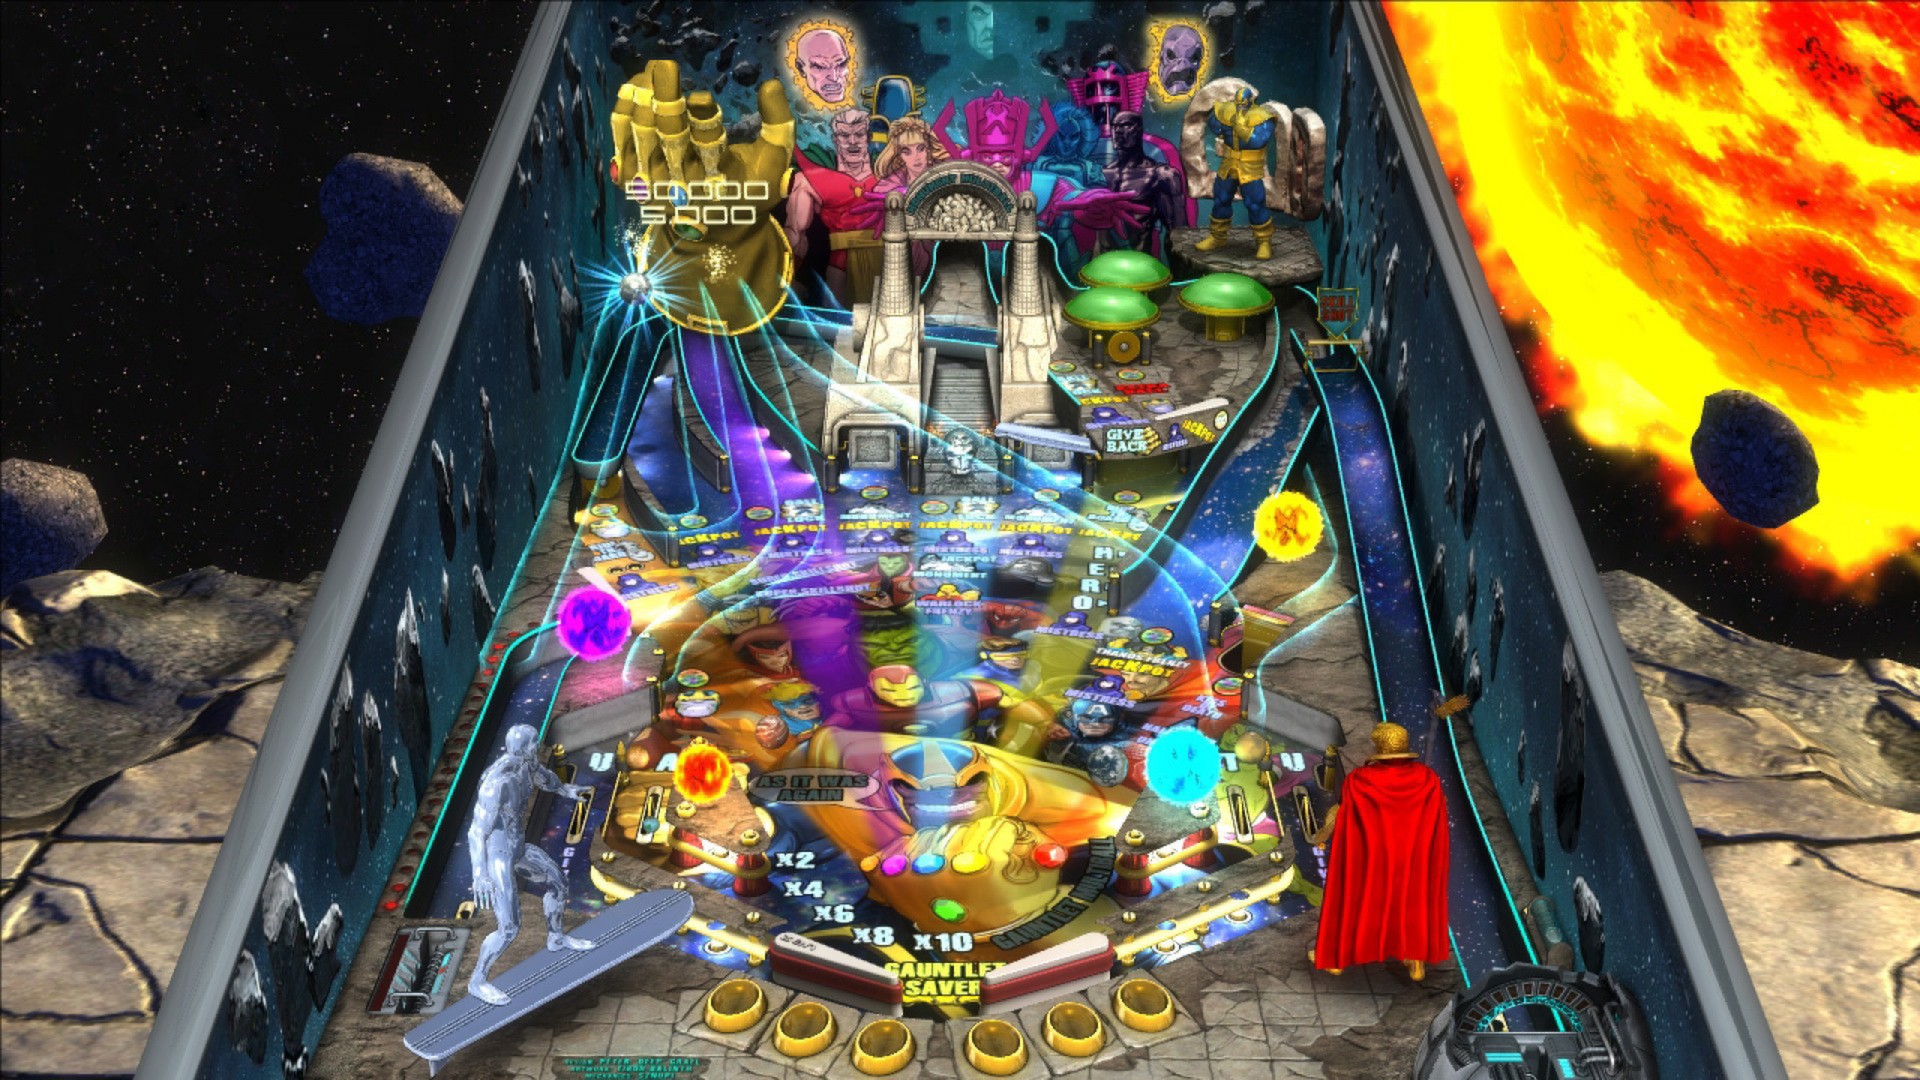 It plays much like real pinball. You can even nudge the table to influence the path of the ball. 